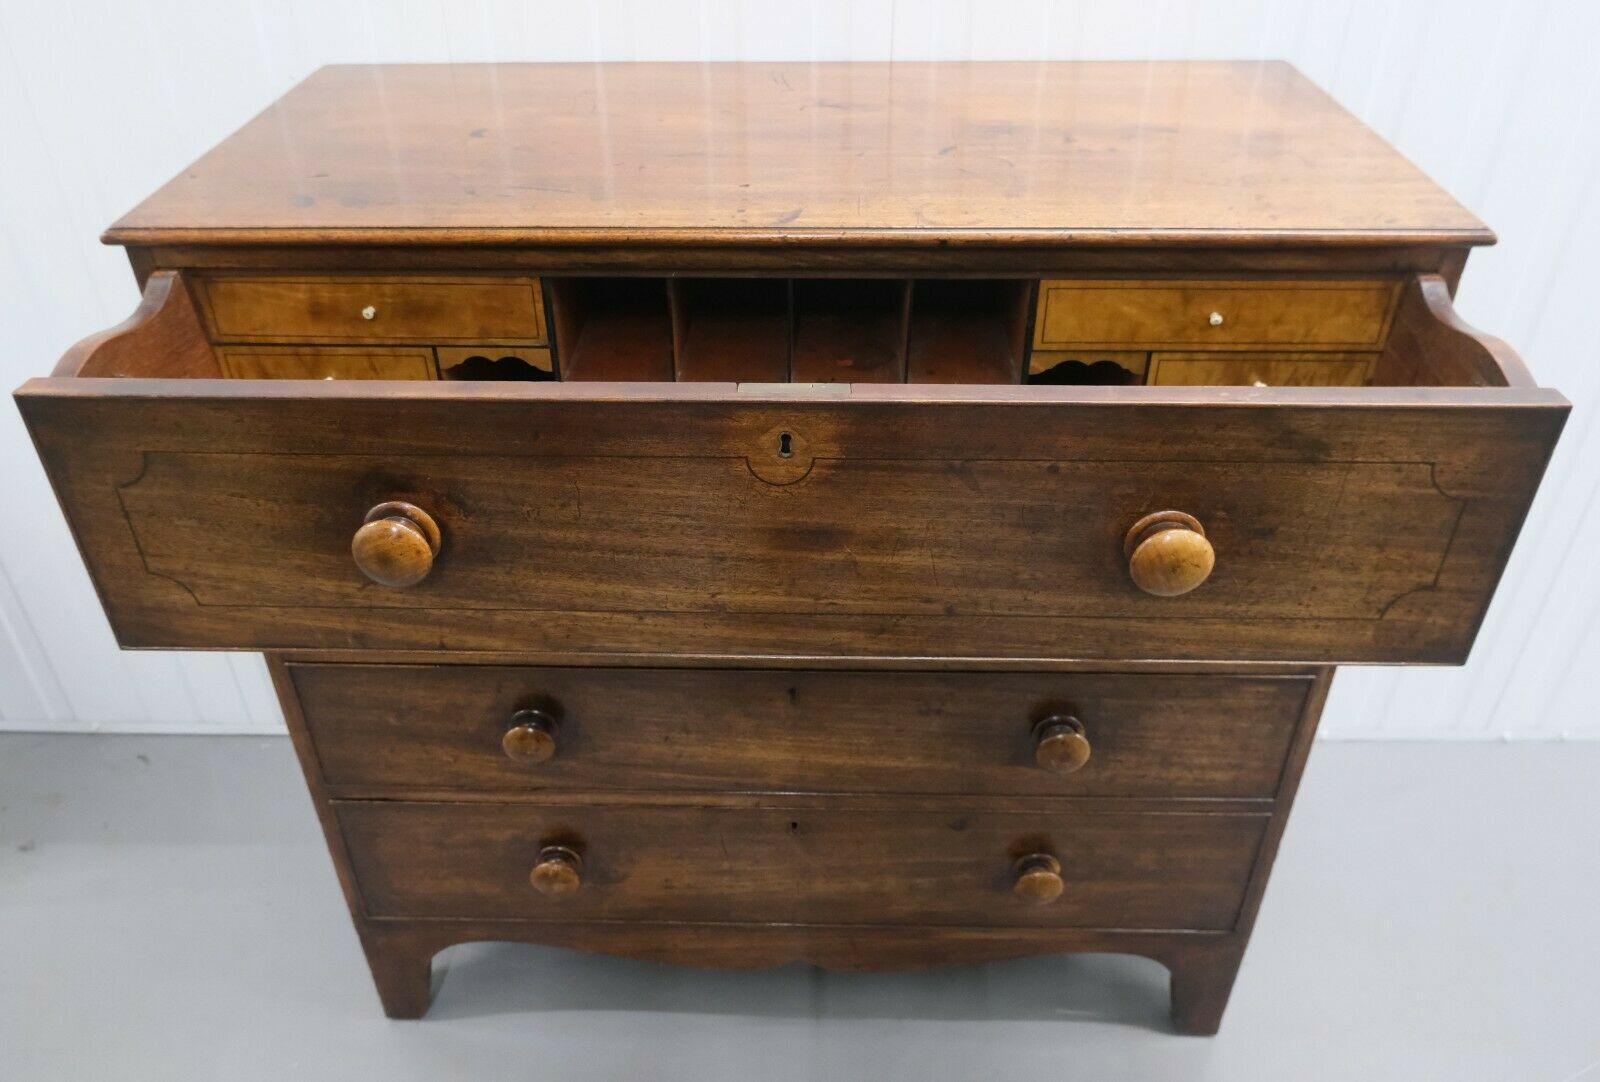 Victorian 19th Century Hardwood Secretaire Chest of Drawers with Revealing Fitted Interior